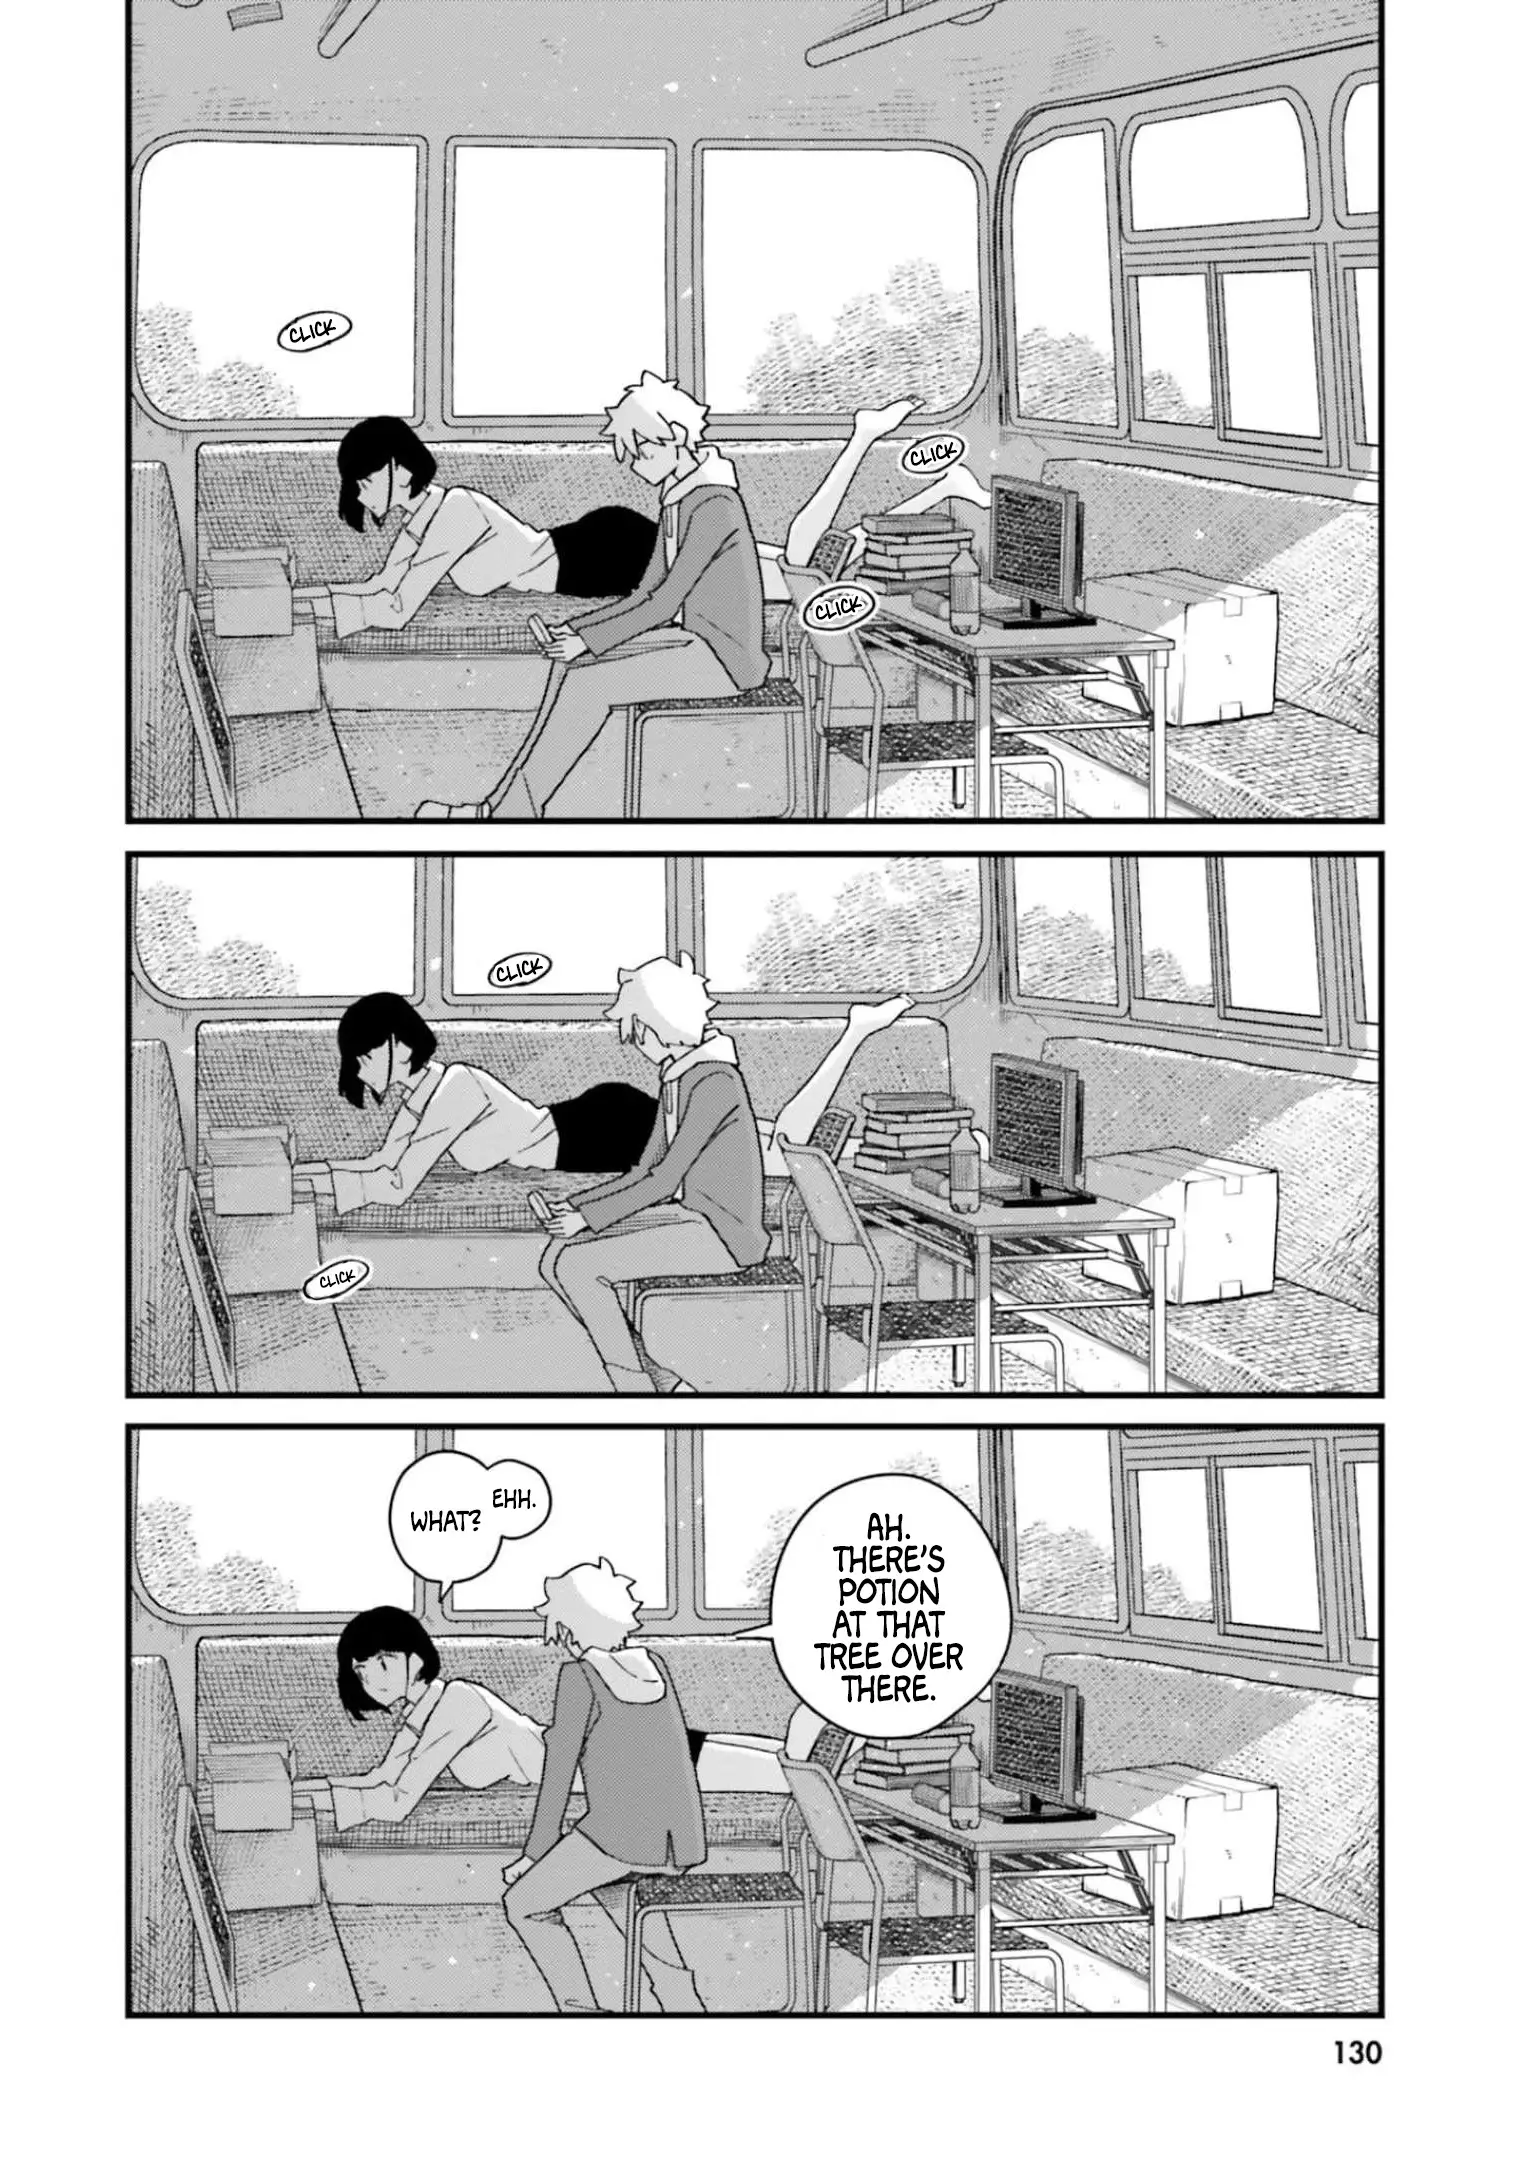 Living In An Abandoned Bus - 9 page 12-74549c1f